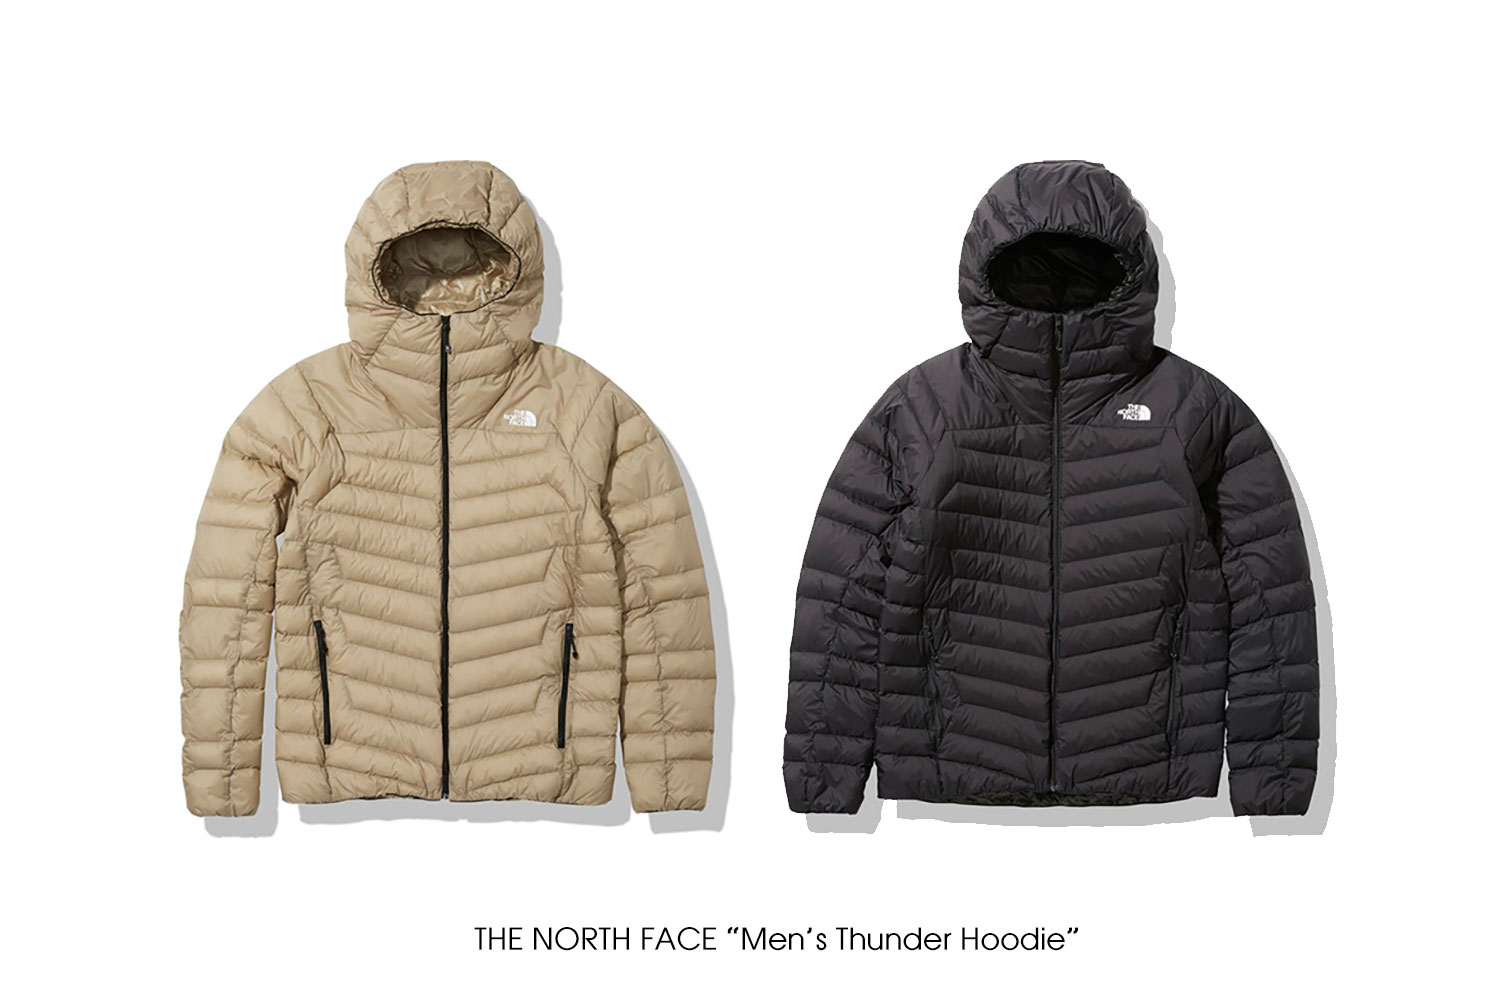 THE NORTH FACE “Men's Thunder Hoodie” | PORTAL(ポータル)